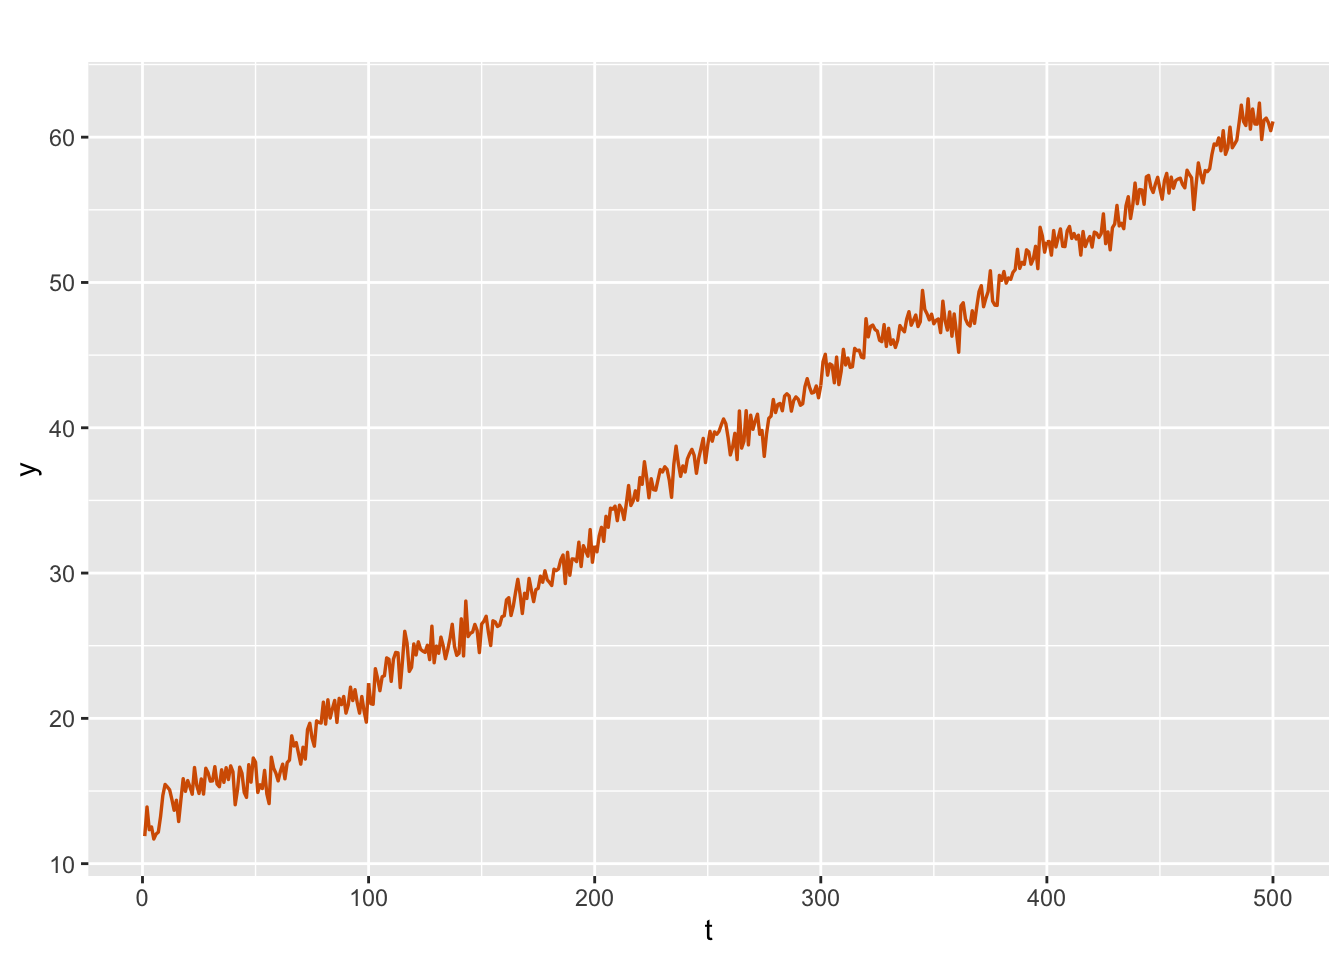 Simulated data from a random walk with drift plus noise model.